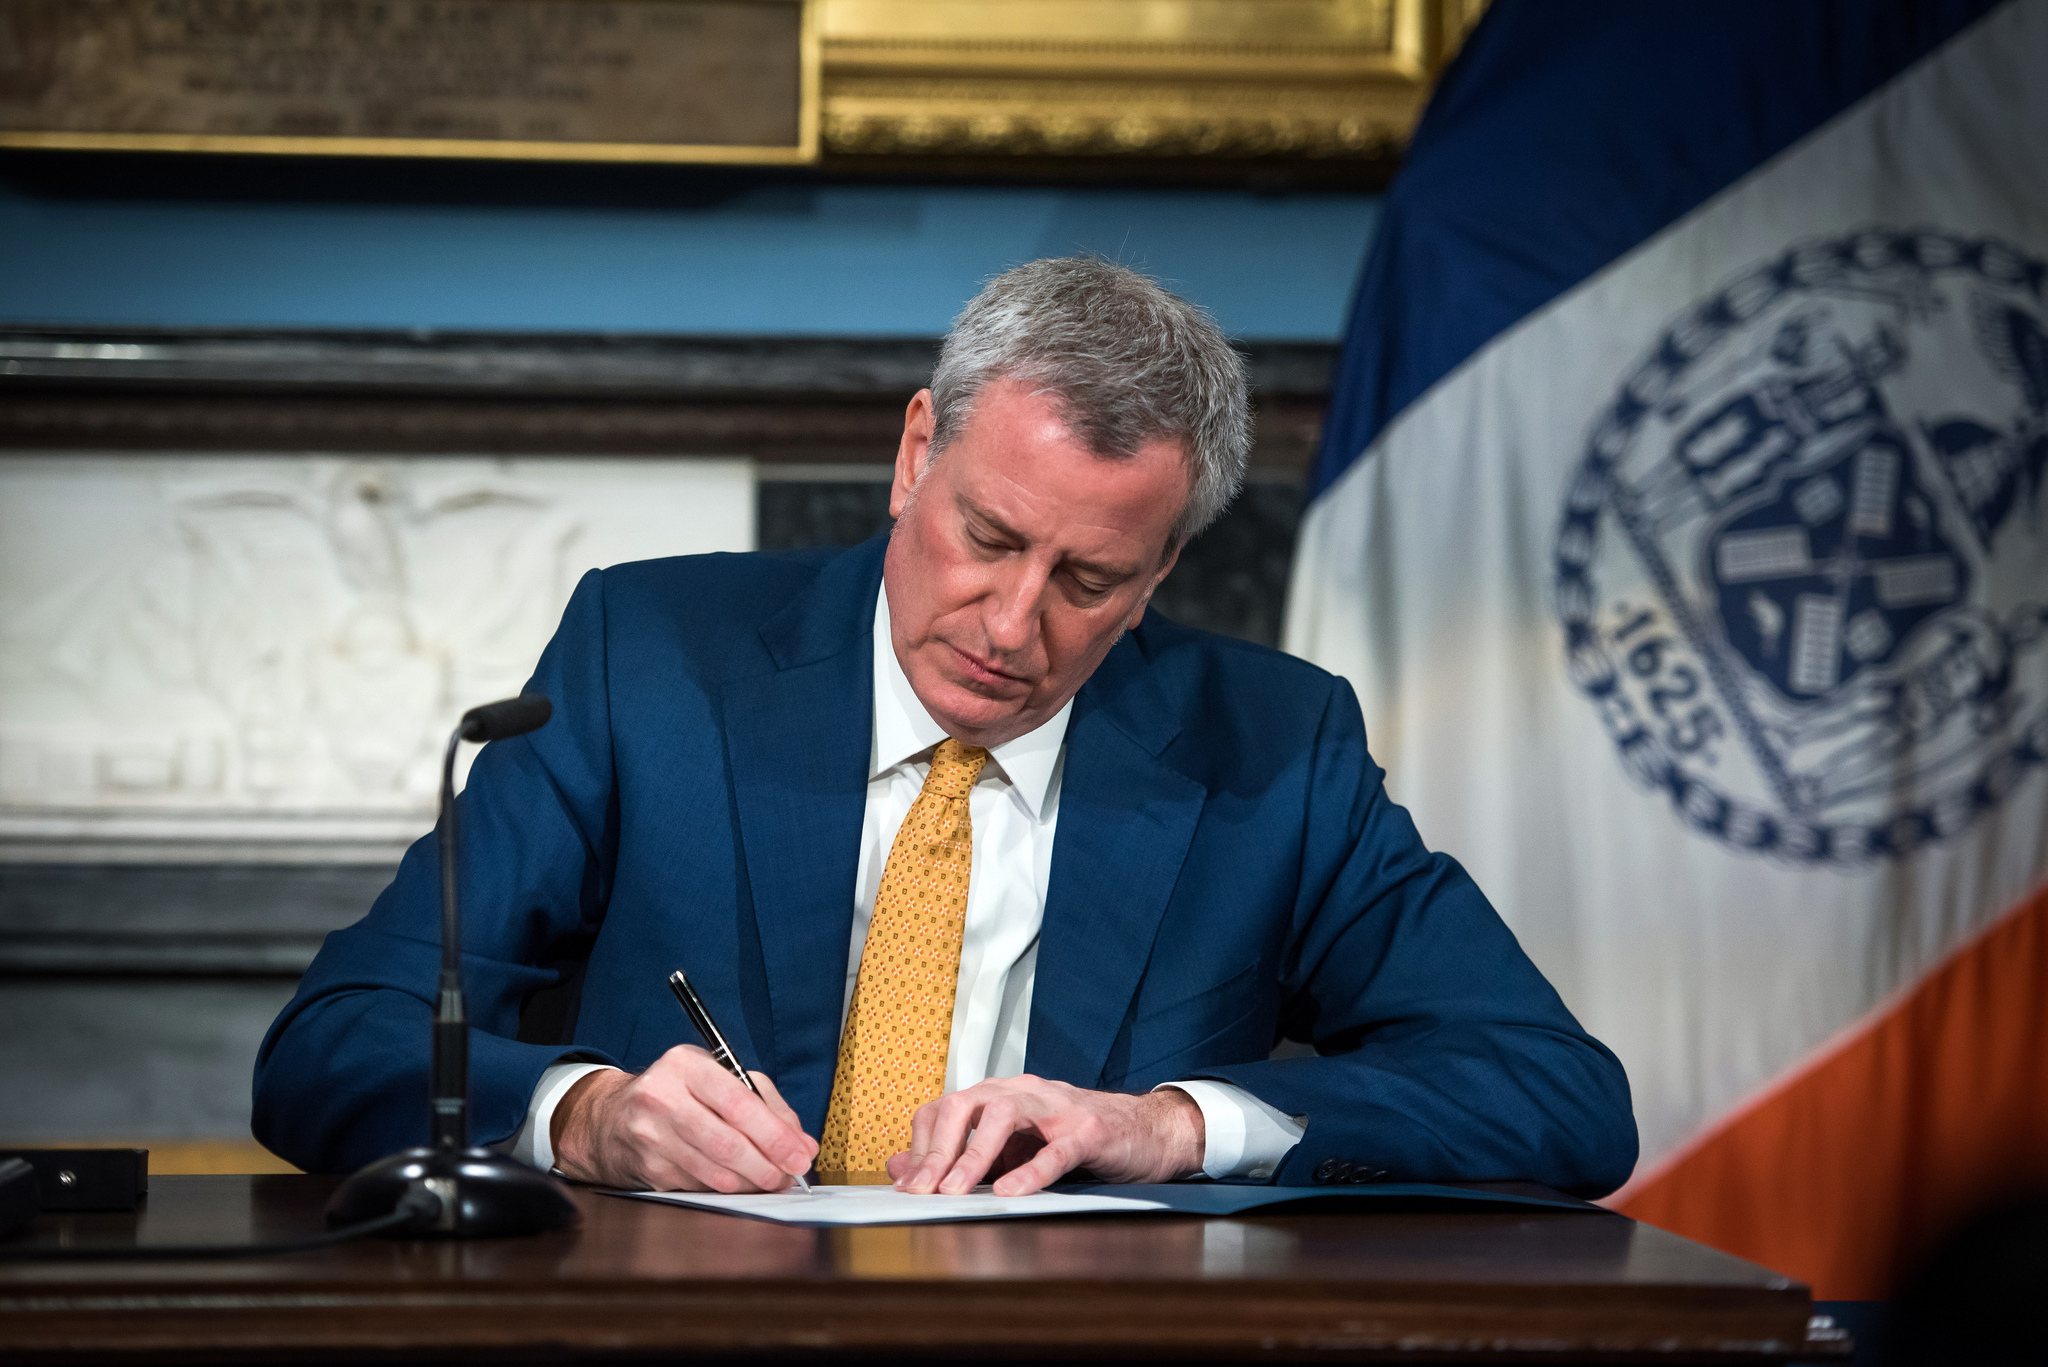 Mayor Bill de Blasio has announced a new health care plan that will be available to every New Yorker, regardless of ability to pay or citizenship. Photo from Flickr/NYCMayorsOffic